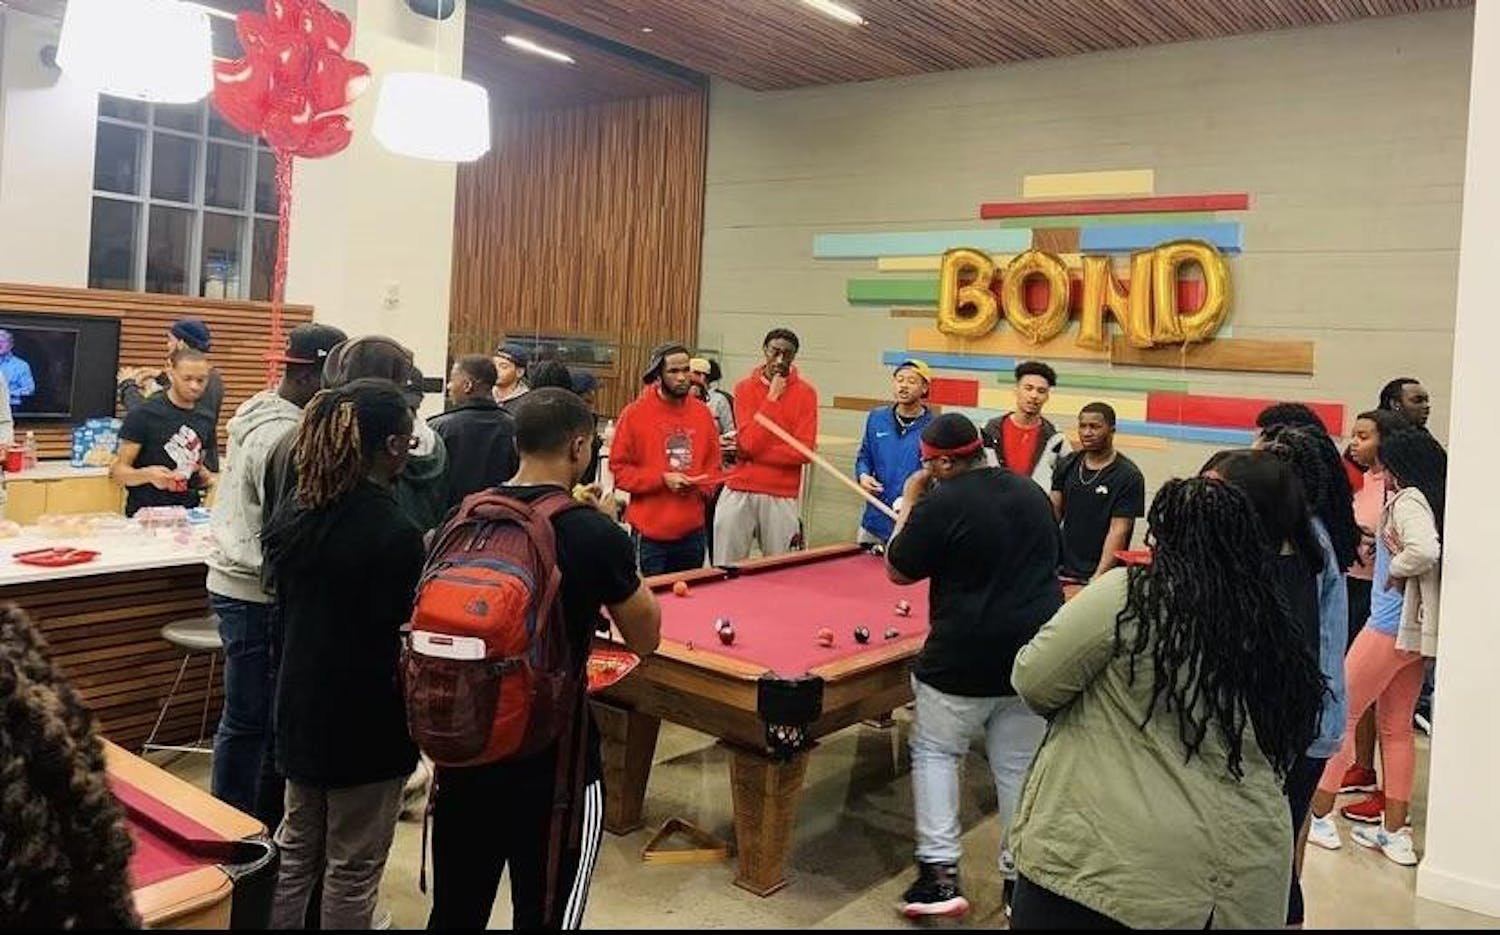 Members of Brothers of Nubian Descent, or BOND, are pictured congregating around a pool table during an organization event. The organization is open to all men of color at the University of South Carolina, and it promotes unity and retention intending to enhance the Black male experience on campus.